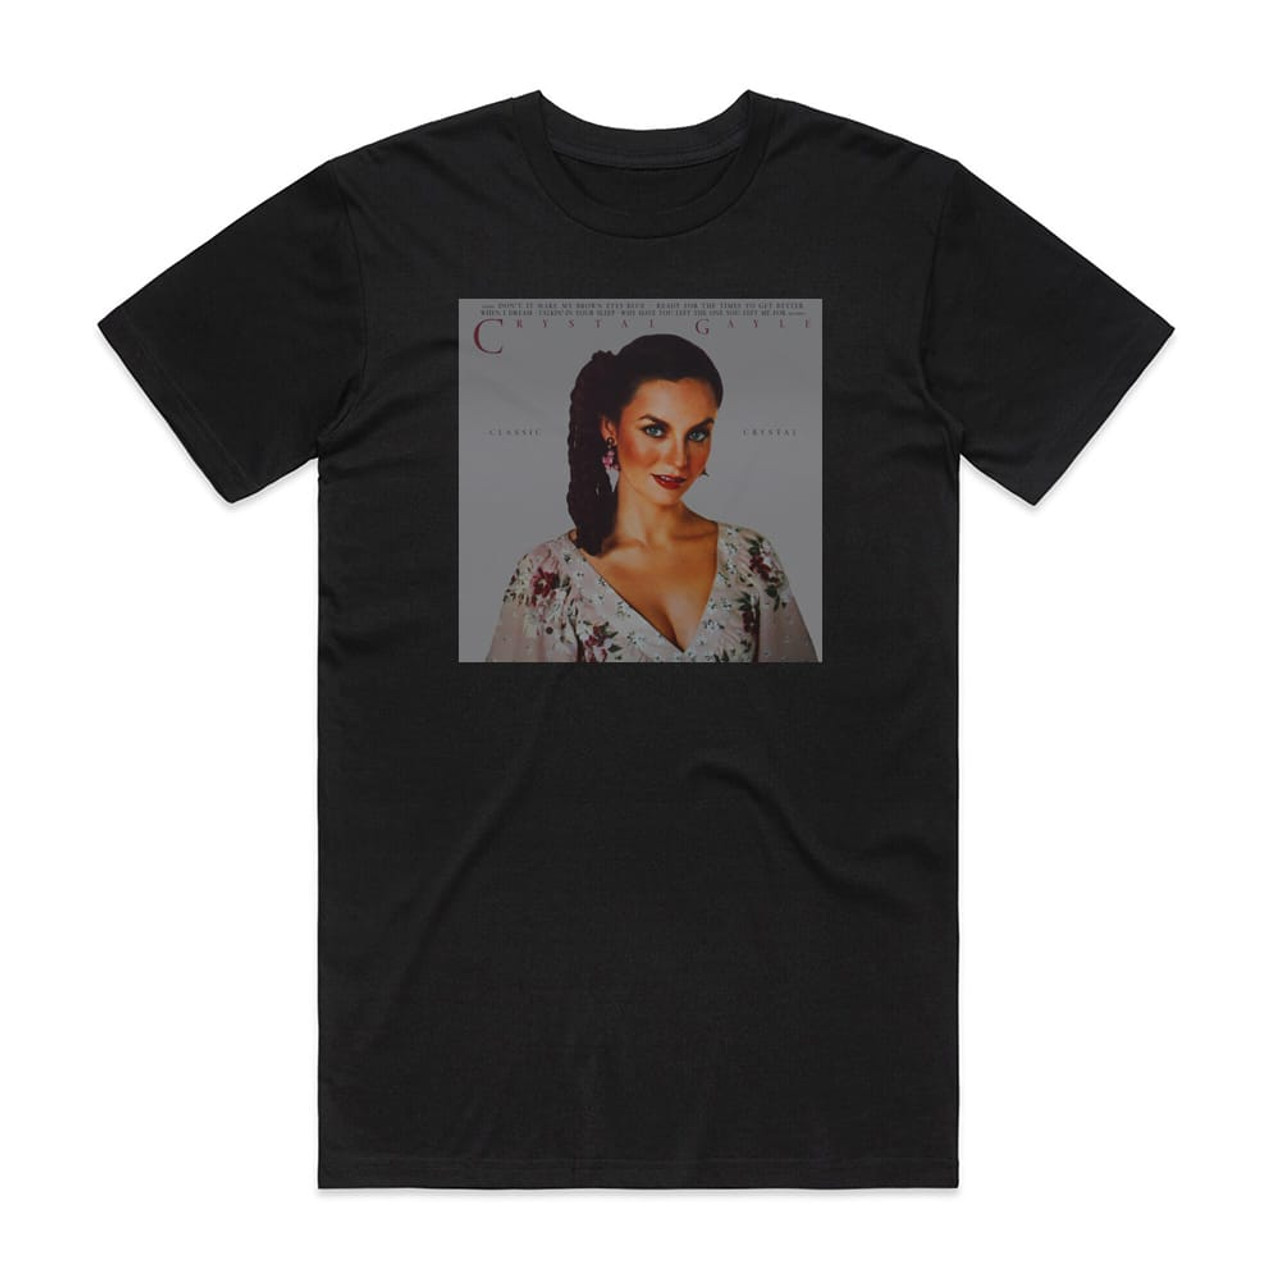 Crystal Gayle Classic Crystal Album Cover T-Shirt Black